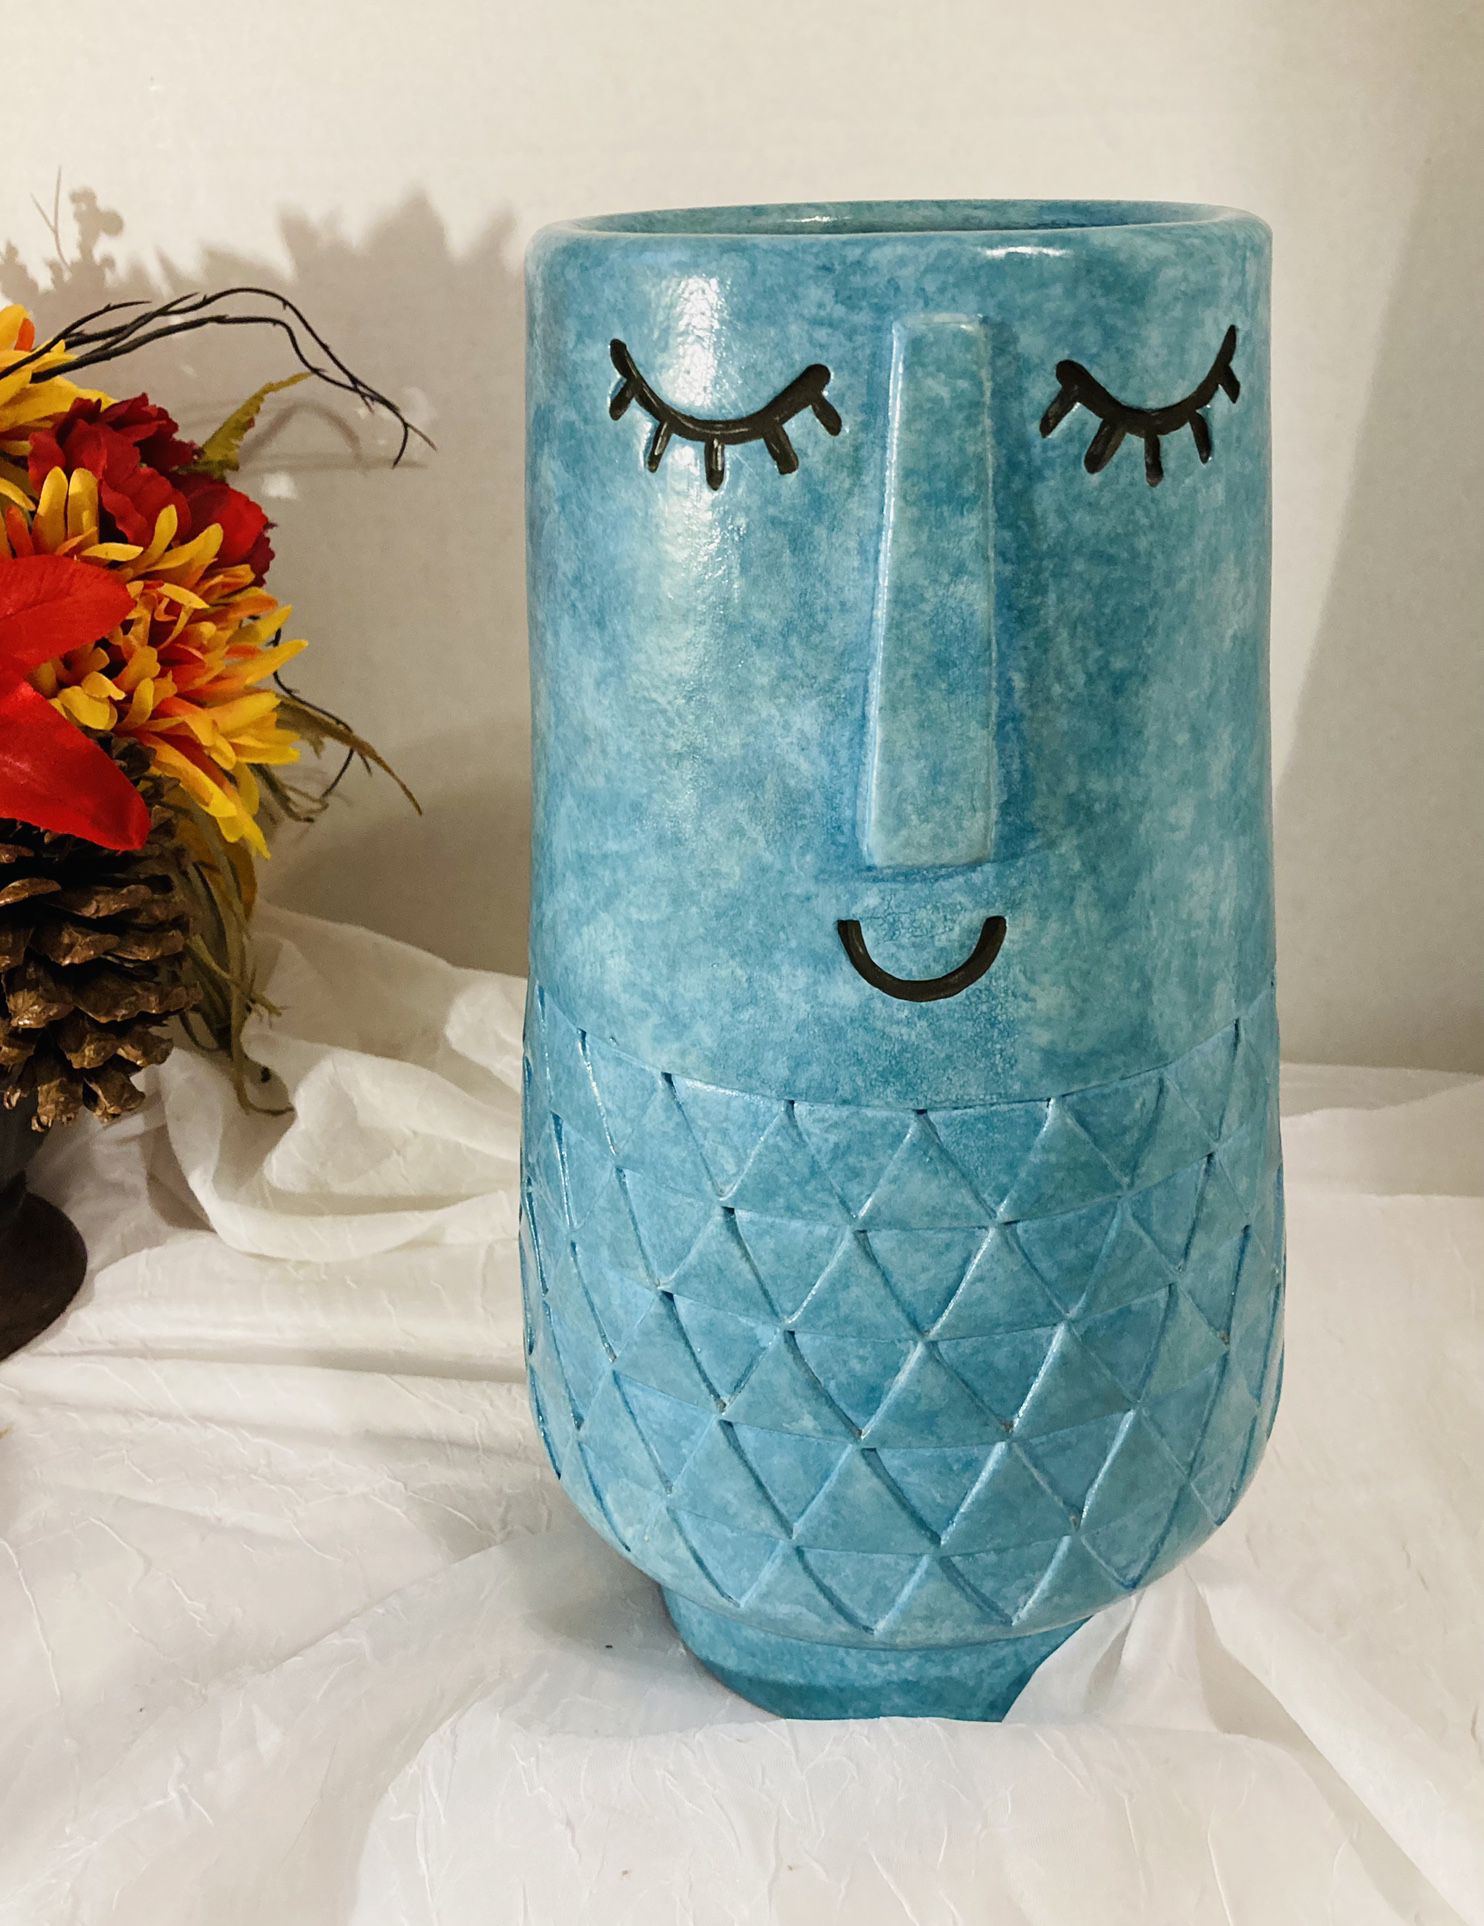 New Turquoise Face Vase from Pier 1 Imports